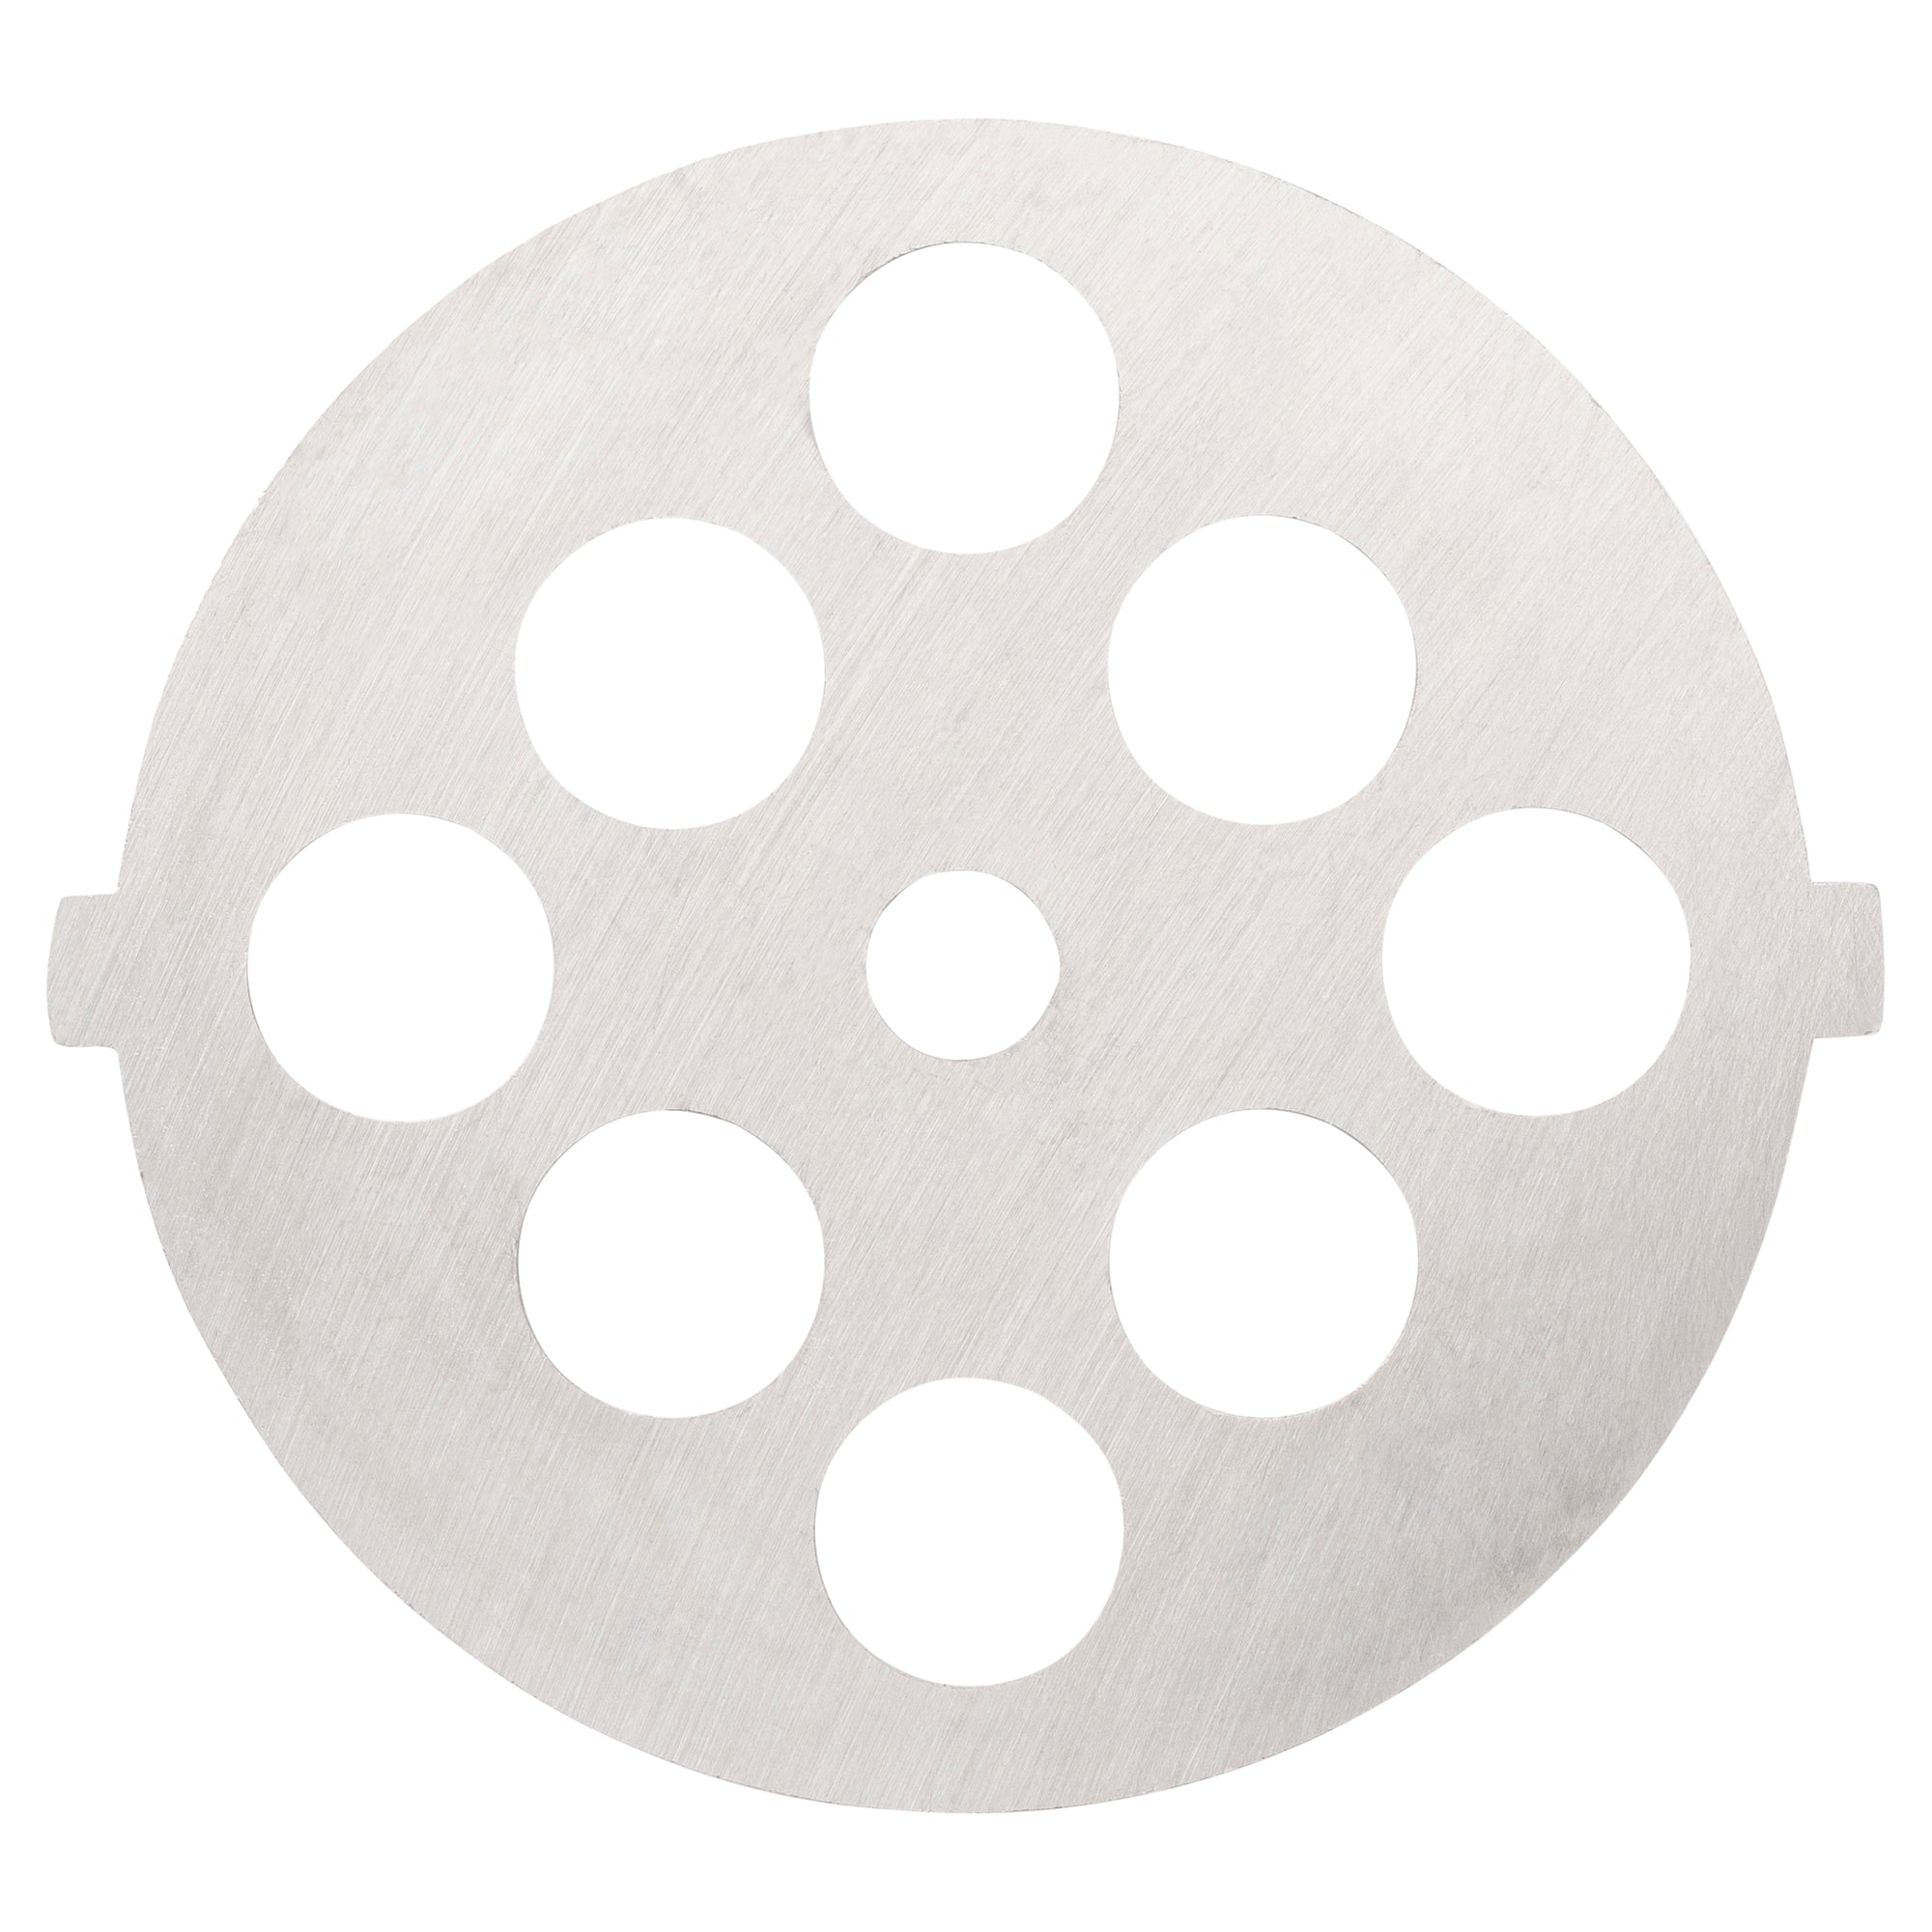 12mm Stainless Steel Cutting Plate for the Luvele Meat Grinder